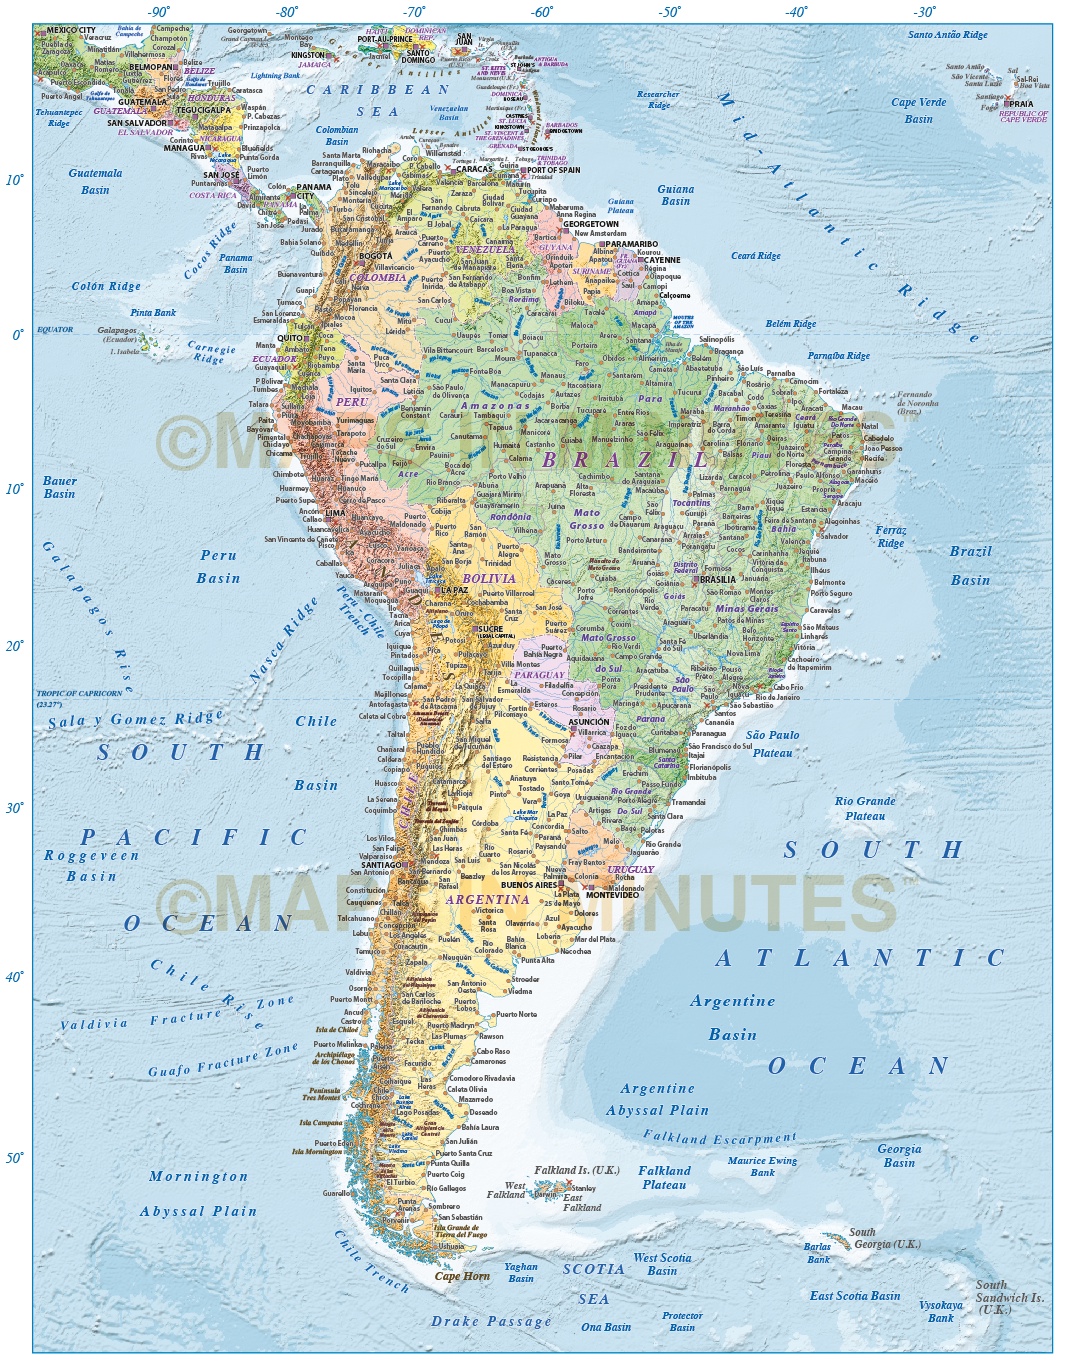 rcode for latinamerica map